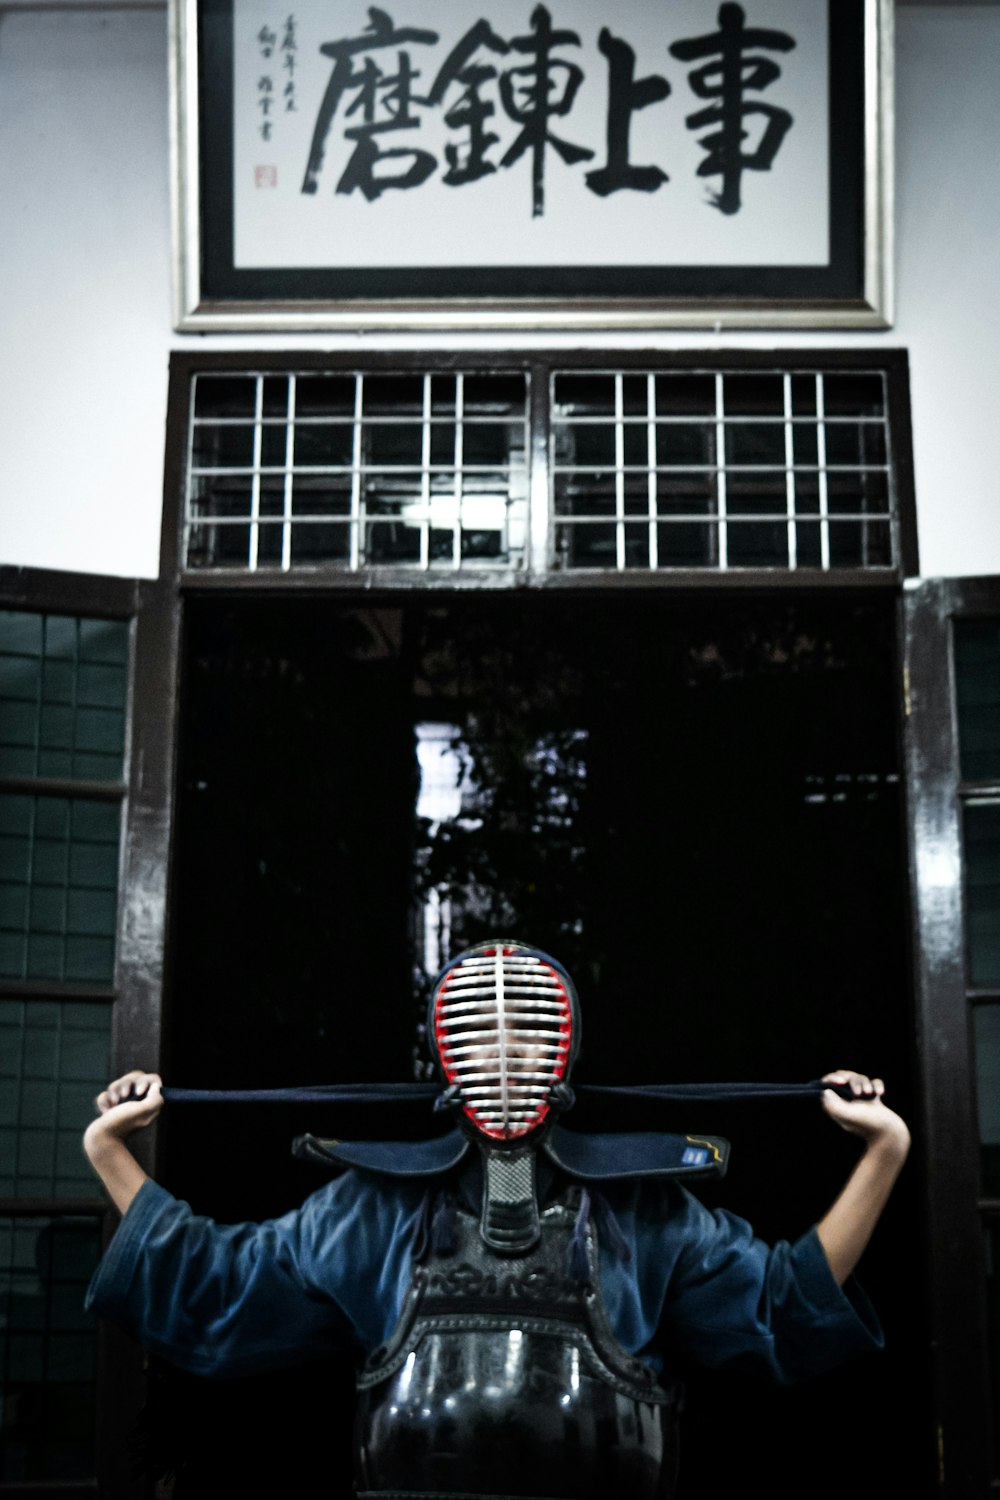 a person with a mask on holding a large object